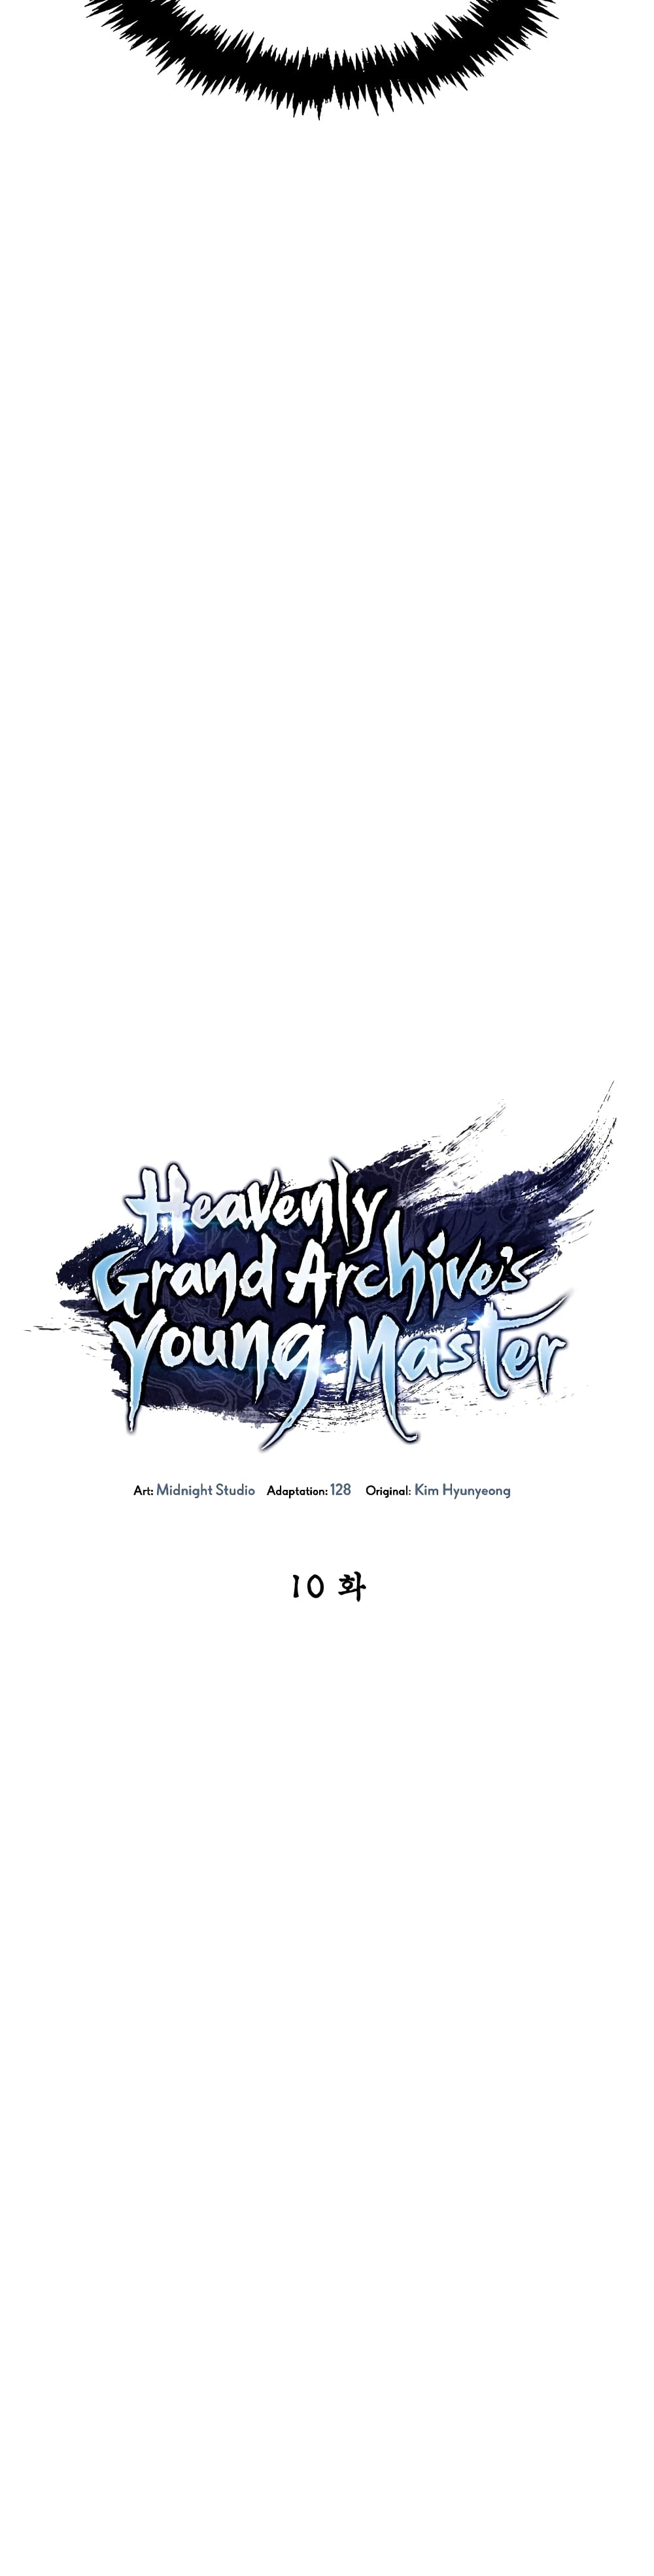 Heavenly Grand Archive’s Young Master 10-10